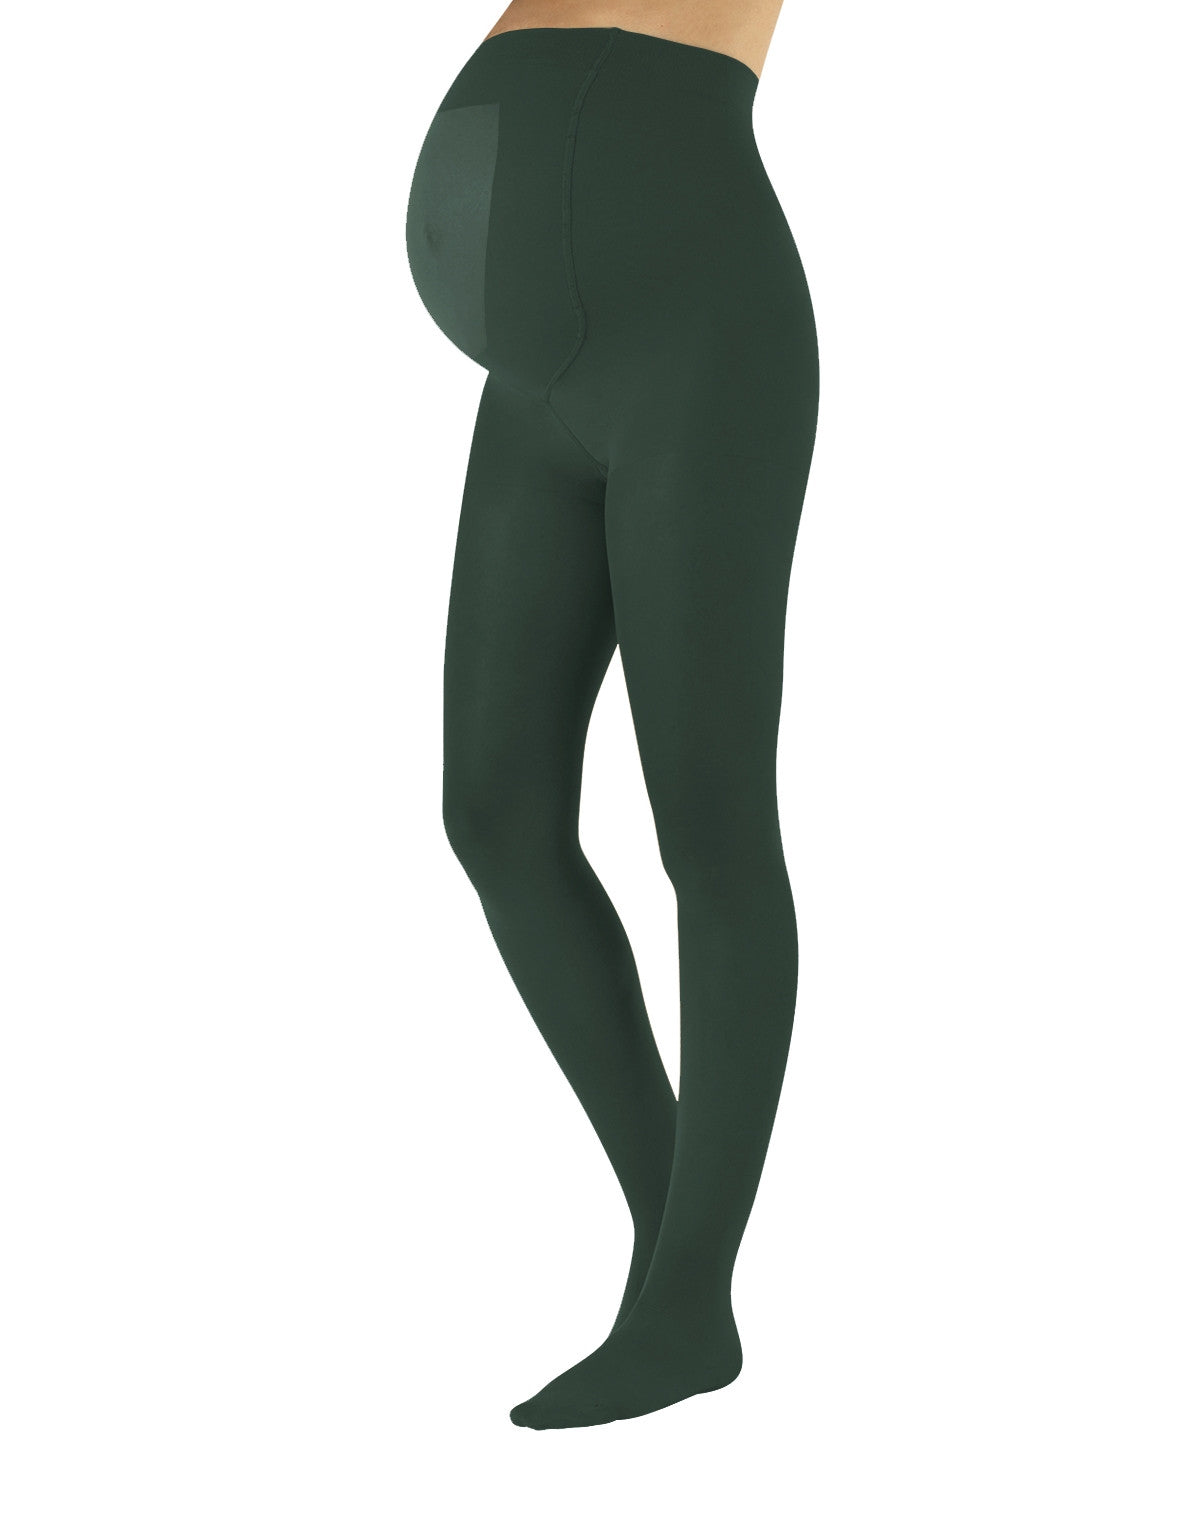 Calzitaly 100 Den Maternity Tights - Dark bottle green ultra opaque pregnancy tights with an extra panel and flat seam.